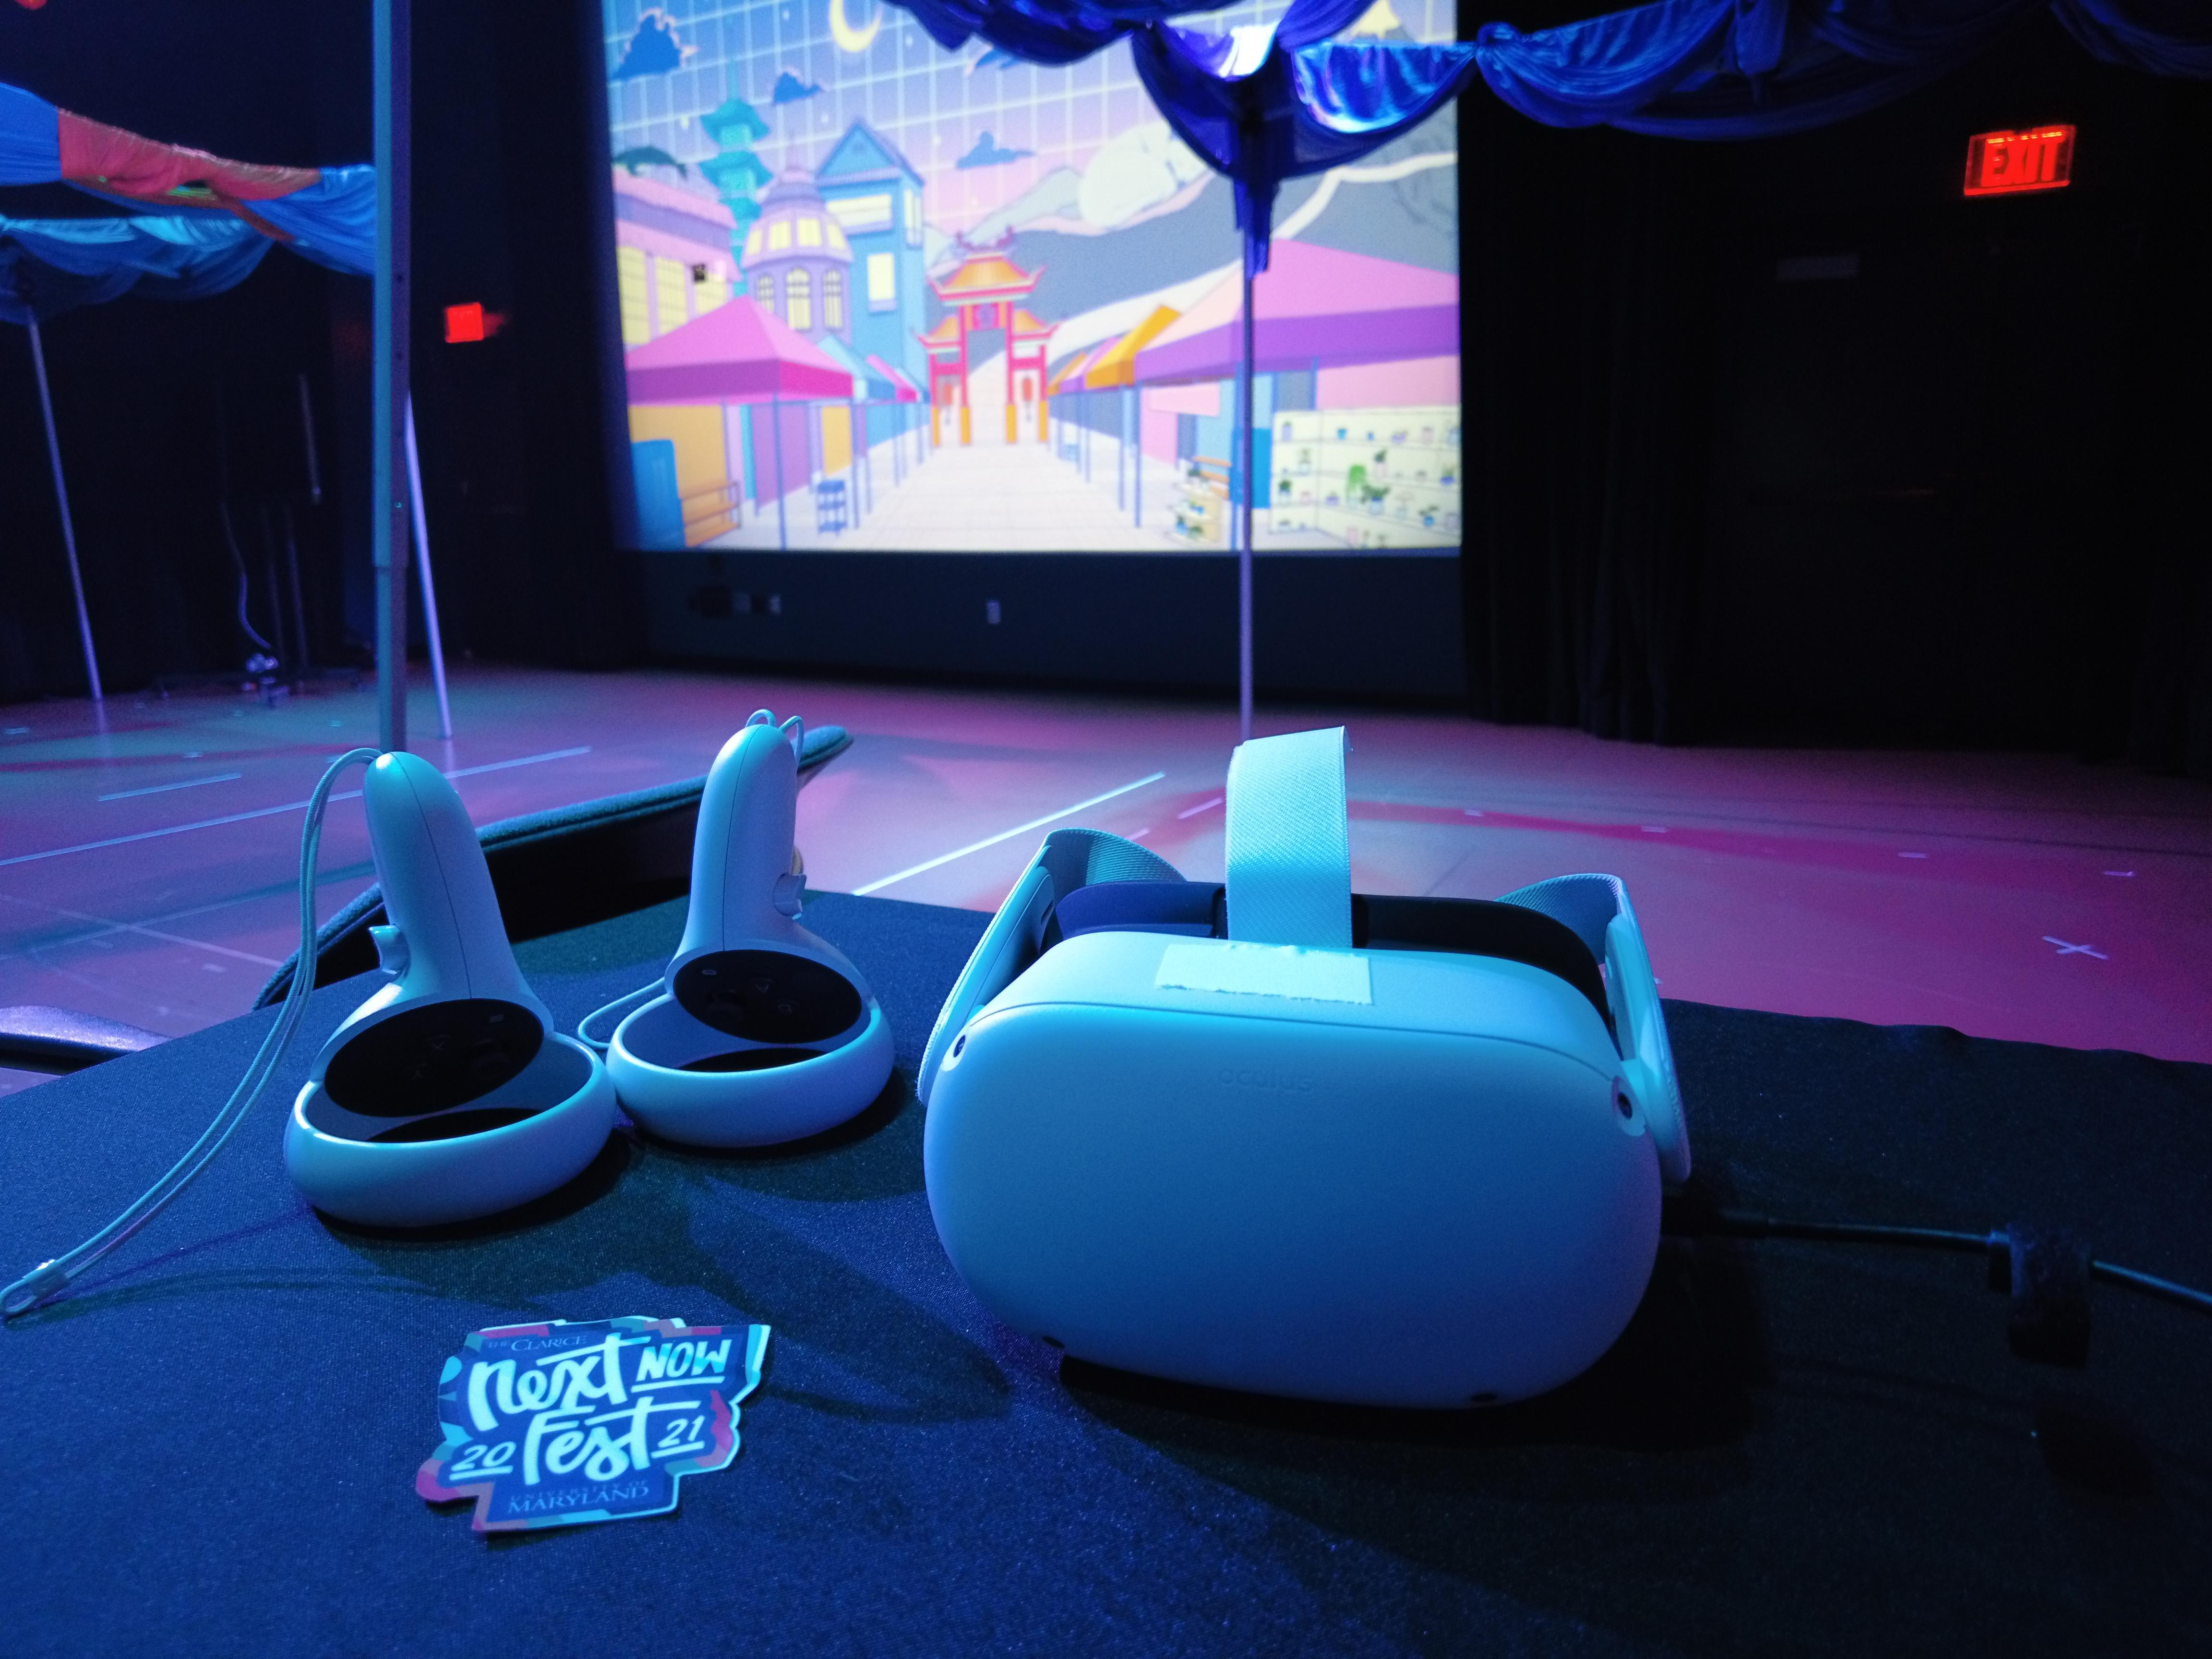 A photo of a white Oculus Quest headset and controllers with a Next Now Fest 2021 sticket